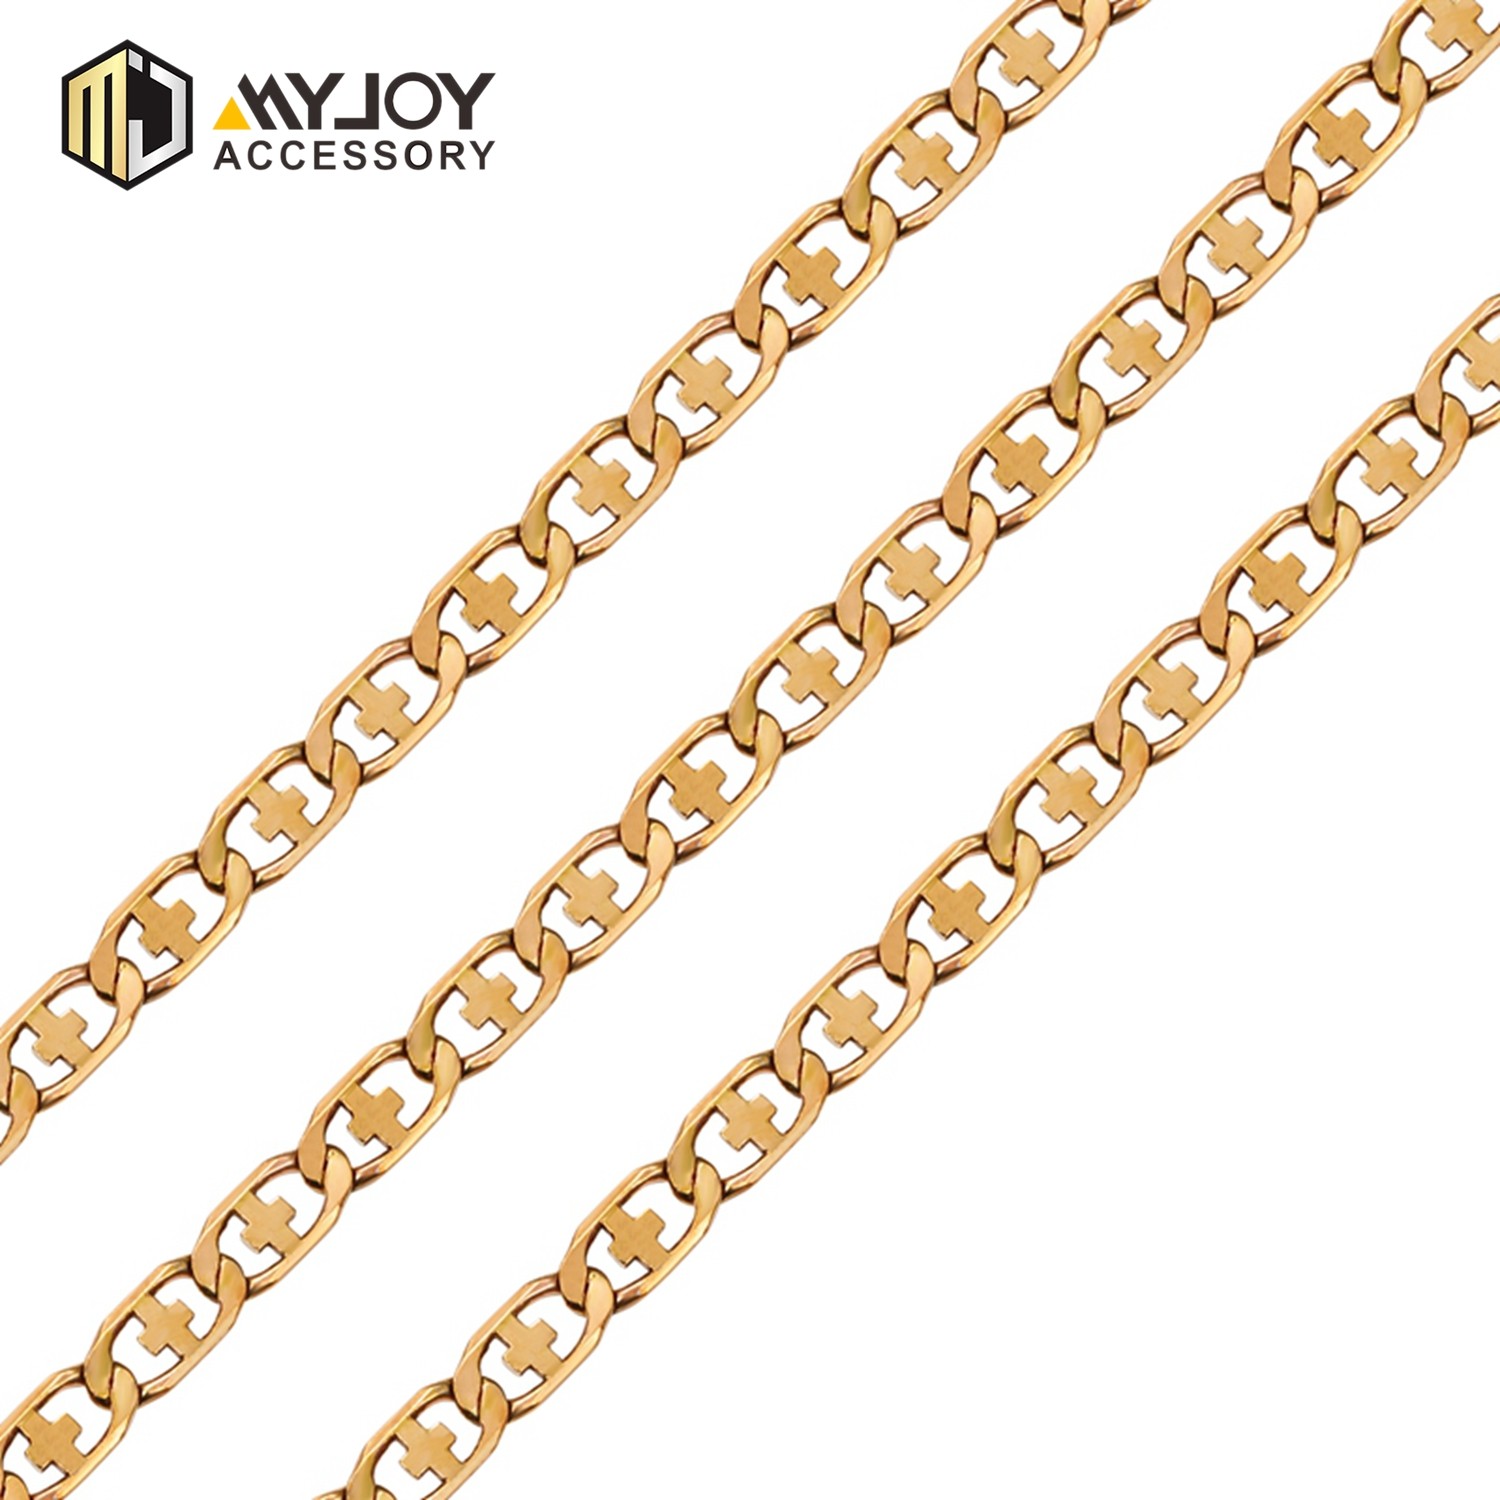 MYJOY New bag chain company for bags-3